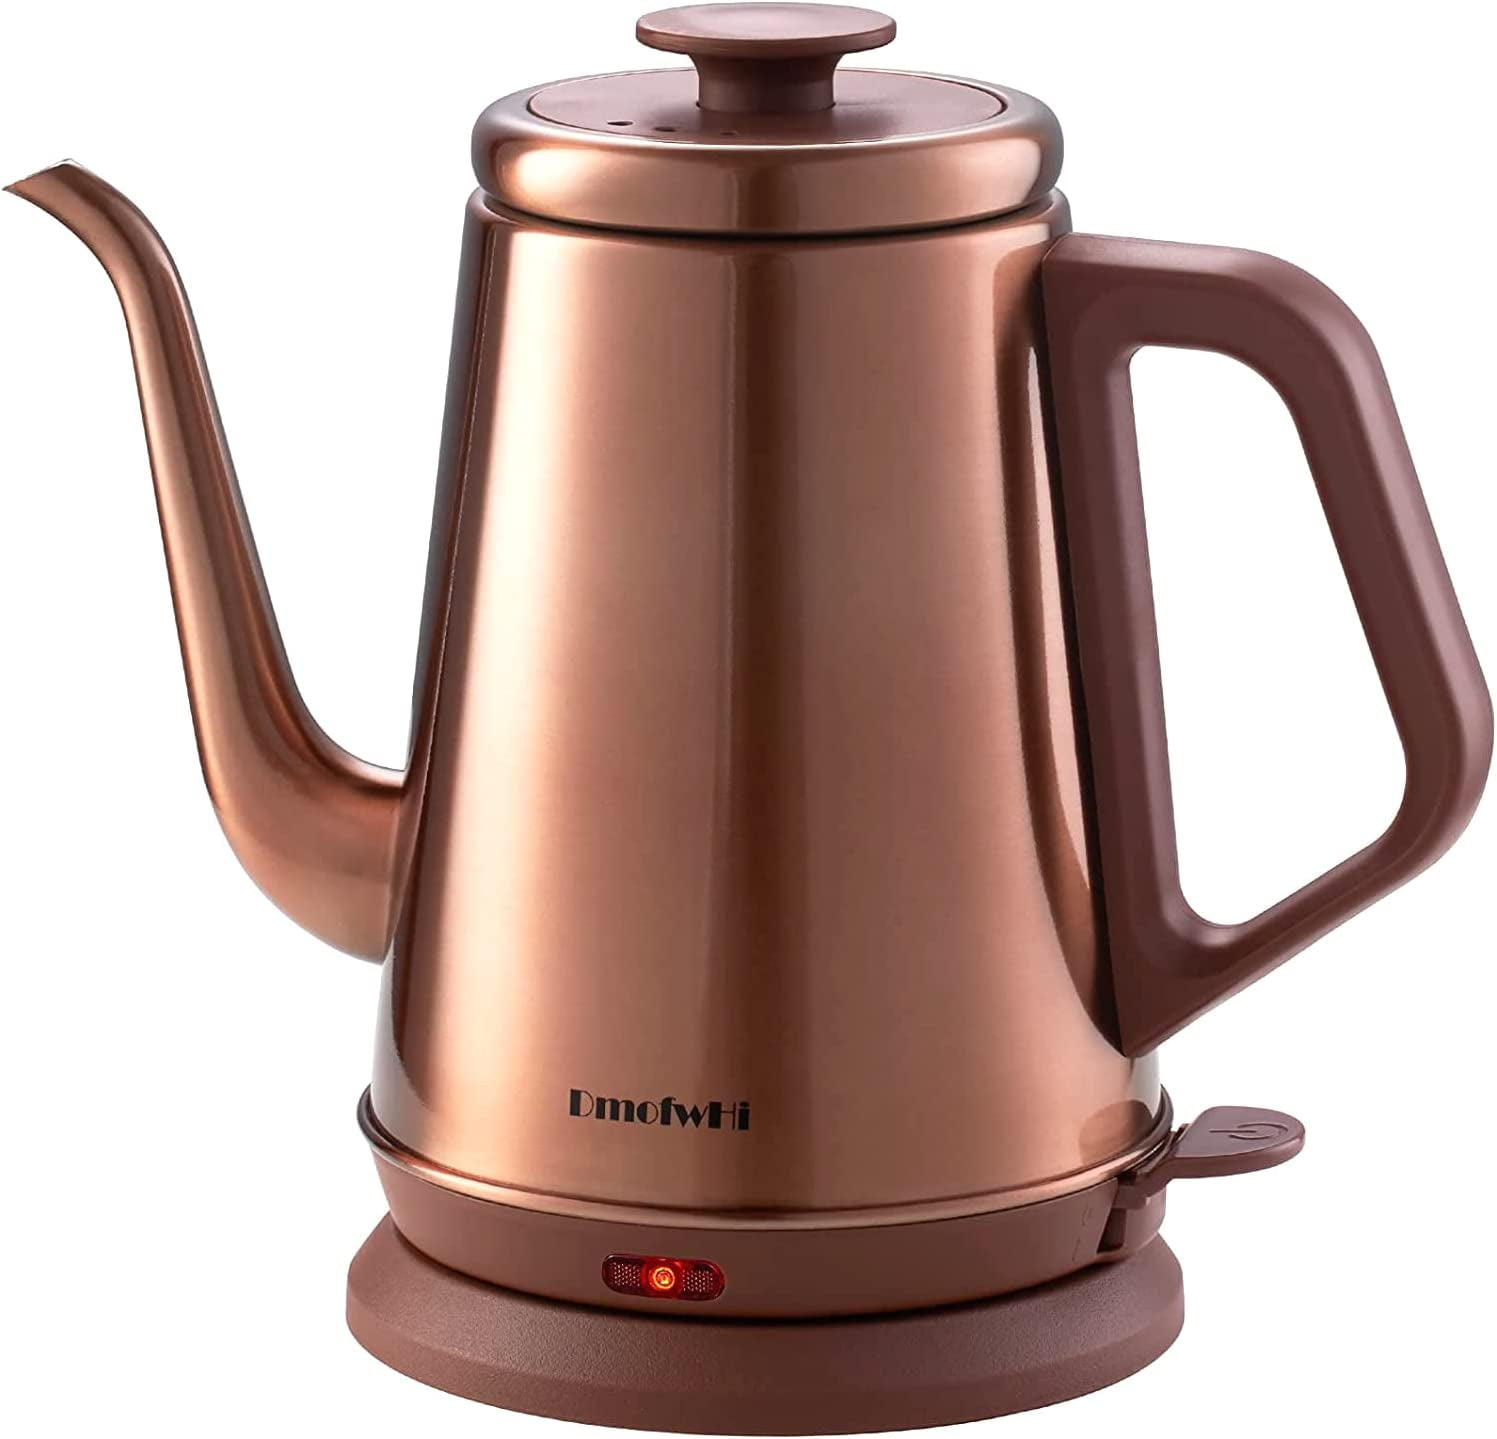 Mittory Electric Kettle Gooseneck Kettle, 800ML Water Kettle, Tea Pot  Stainless Steel For Coffee & Tea With Fast Heating, Auto-Shut Off And  Boil-Dry Protection Tech 